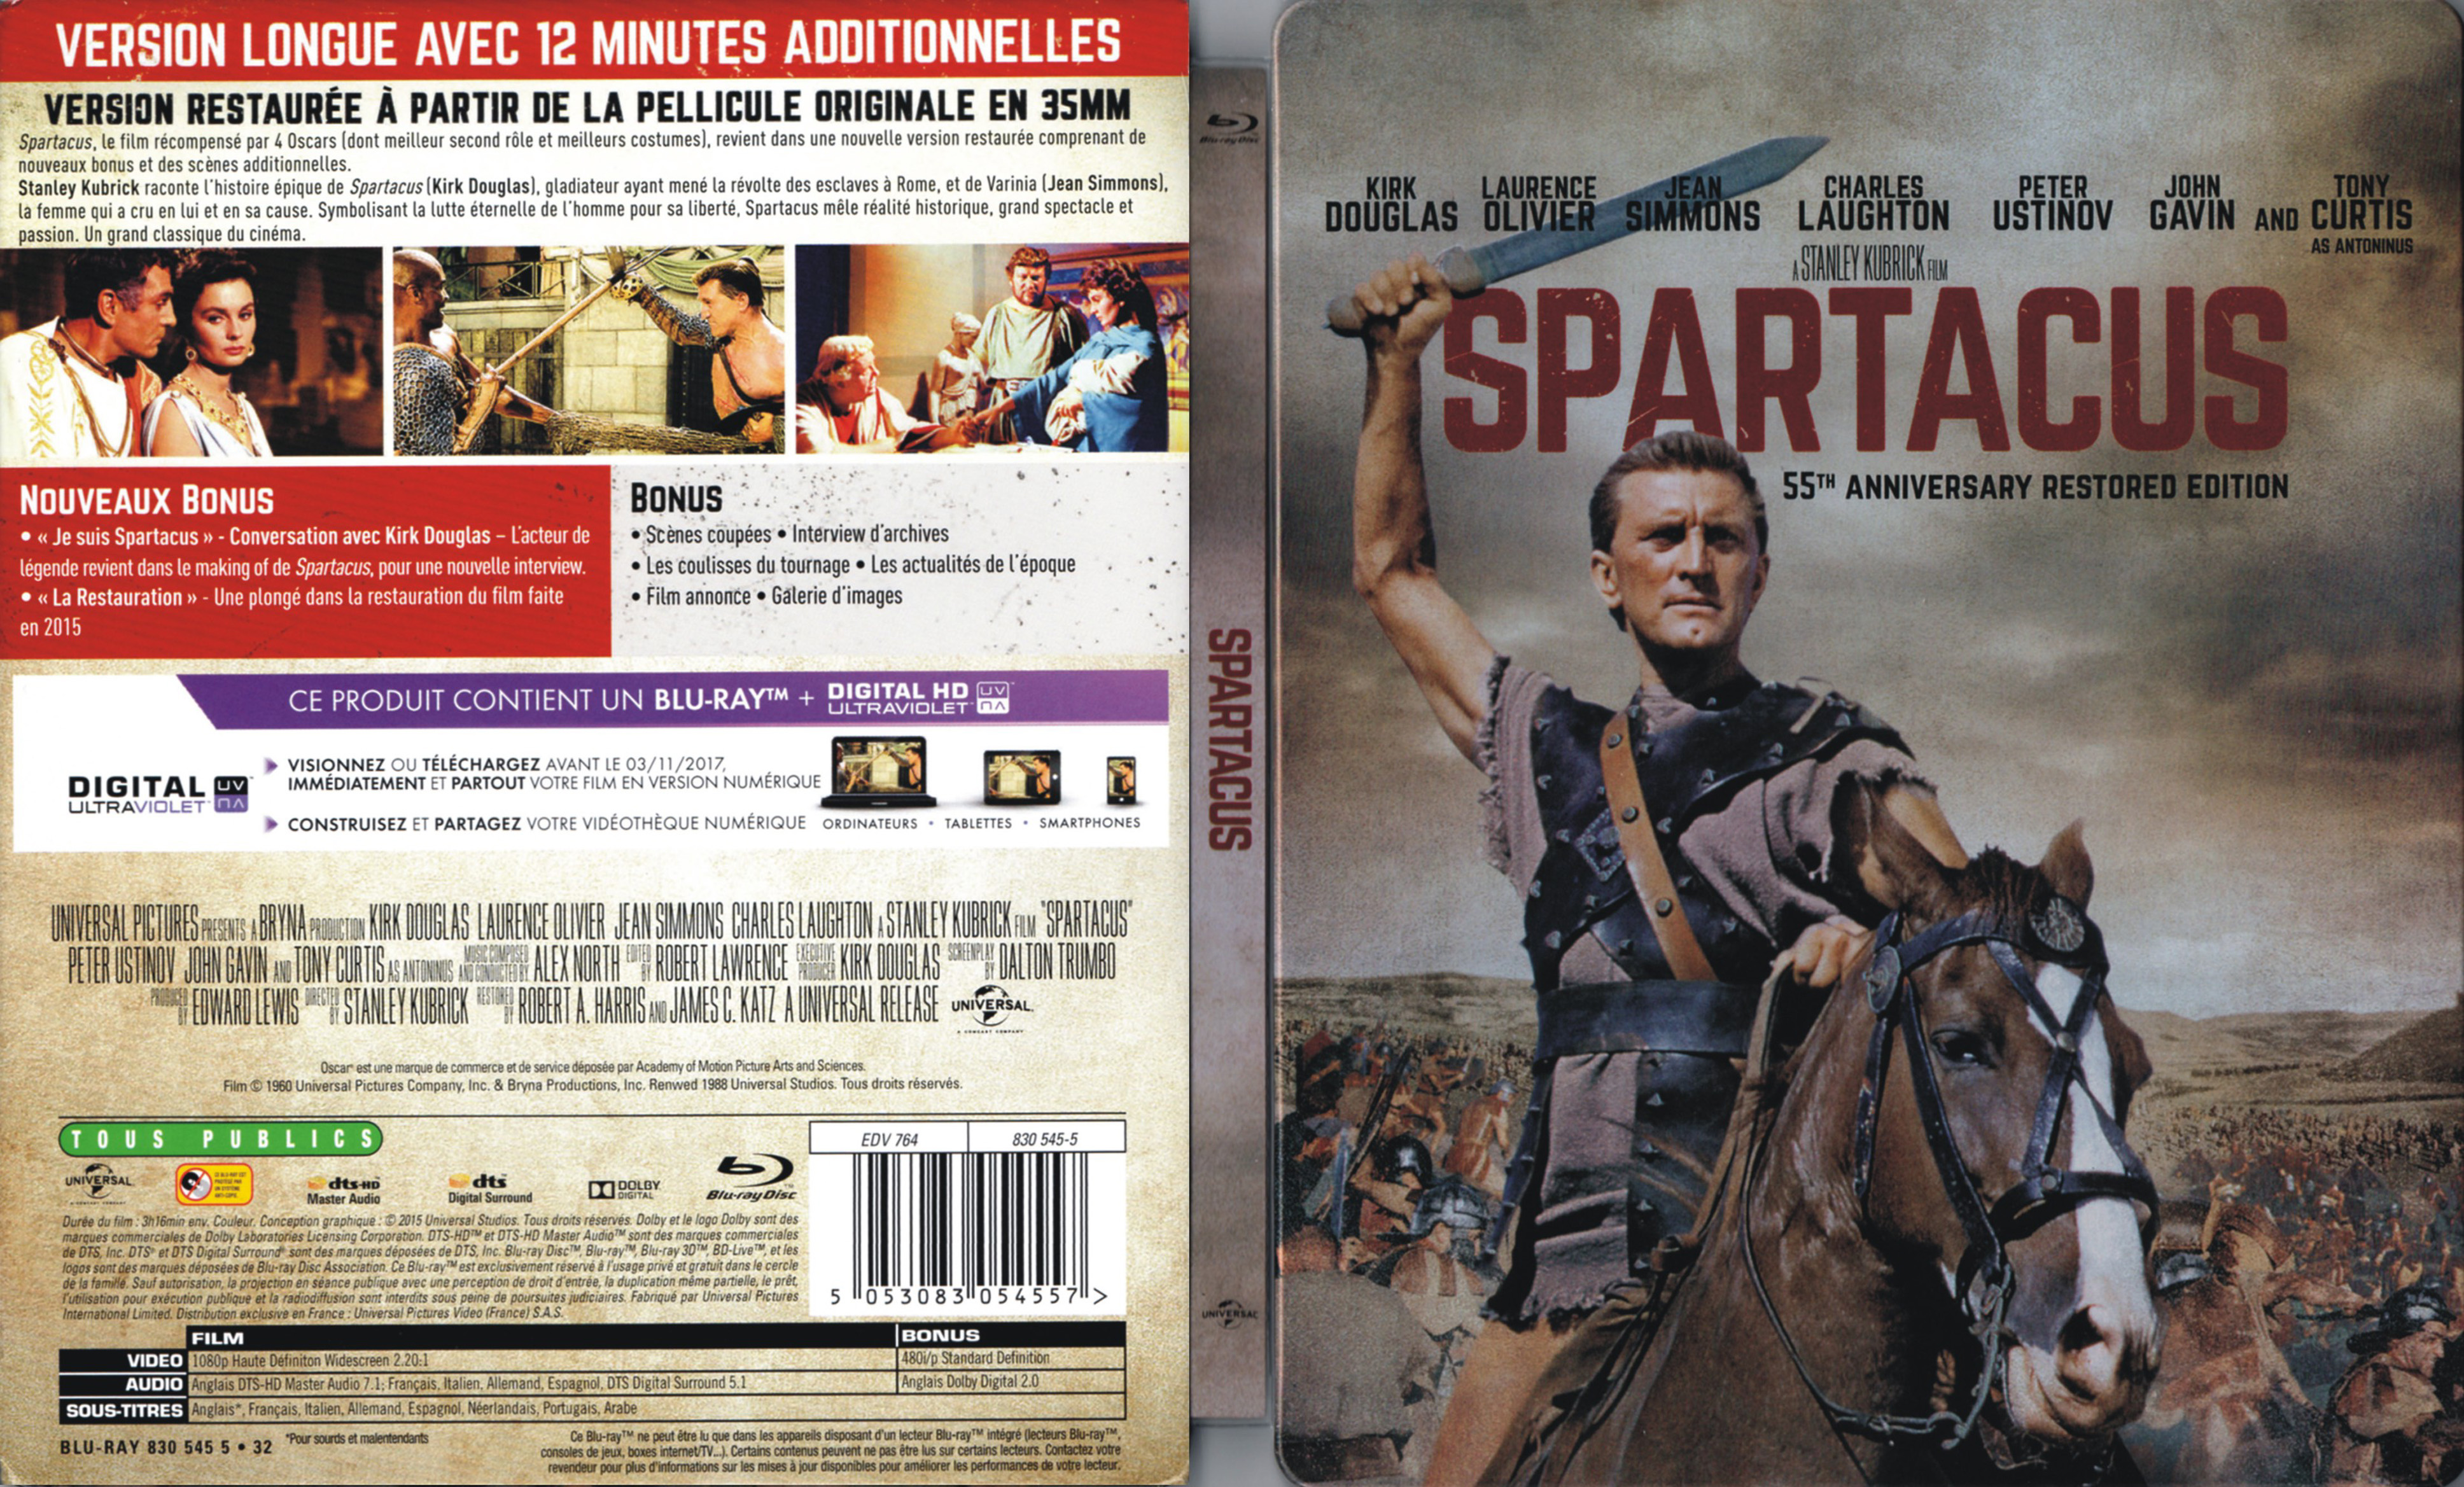 Jaquette DVD Spartacus (BLU-RAY) v3